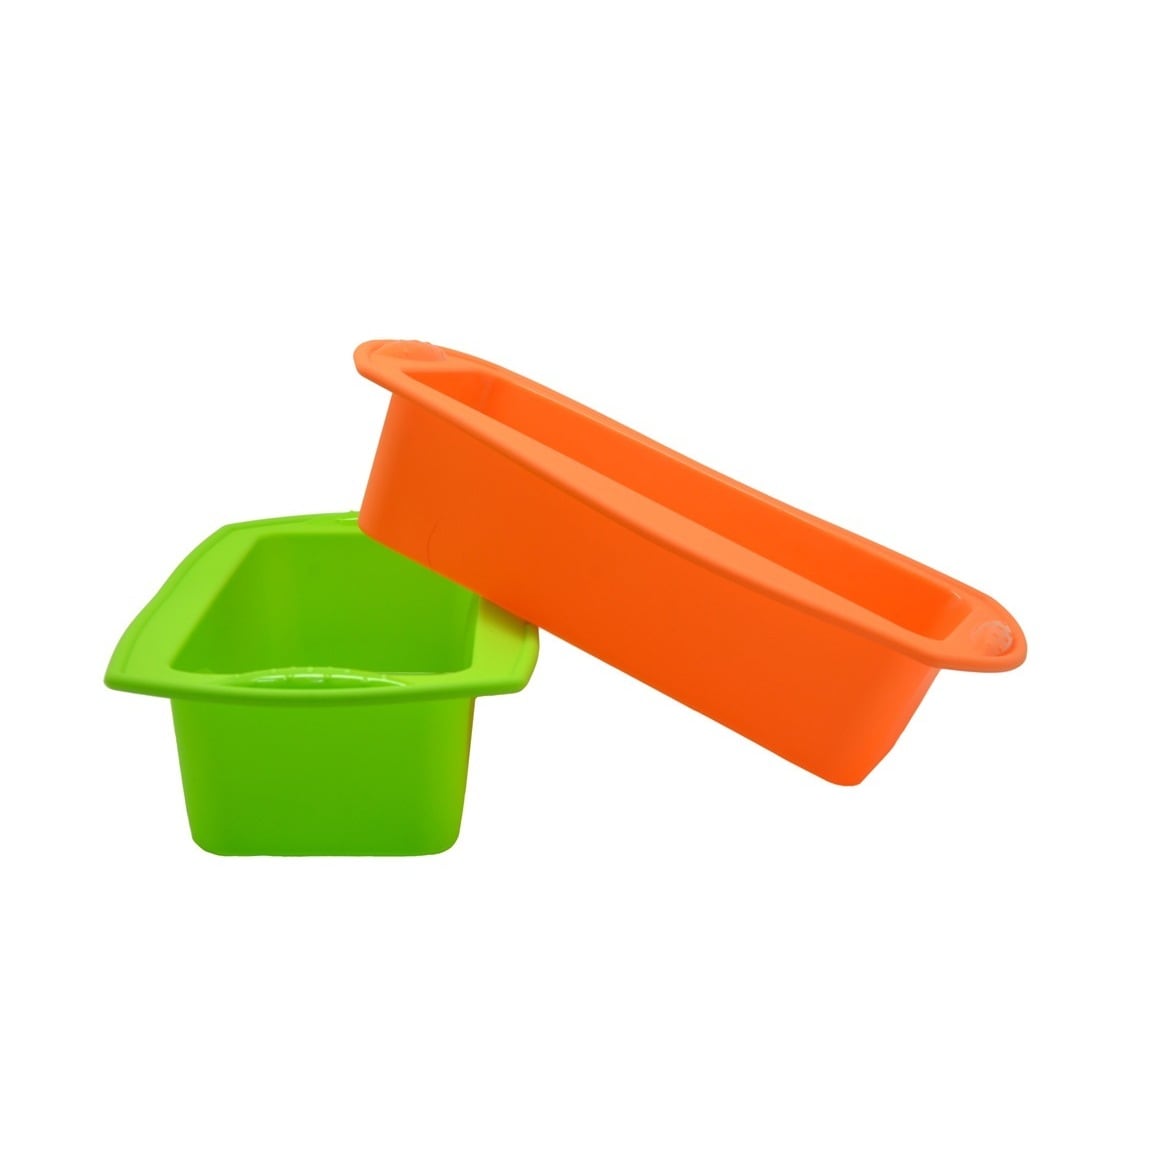 https://ak1.ostkcdn.com/images/products/12647081/Orange-and-Green-Silicone-Rectangular-Cake-Loaf-Pan-Set-Set-of-2-781f3625-821d-48c9-8a25-56df16c837bd.jpg